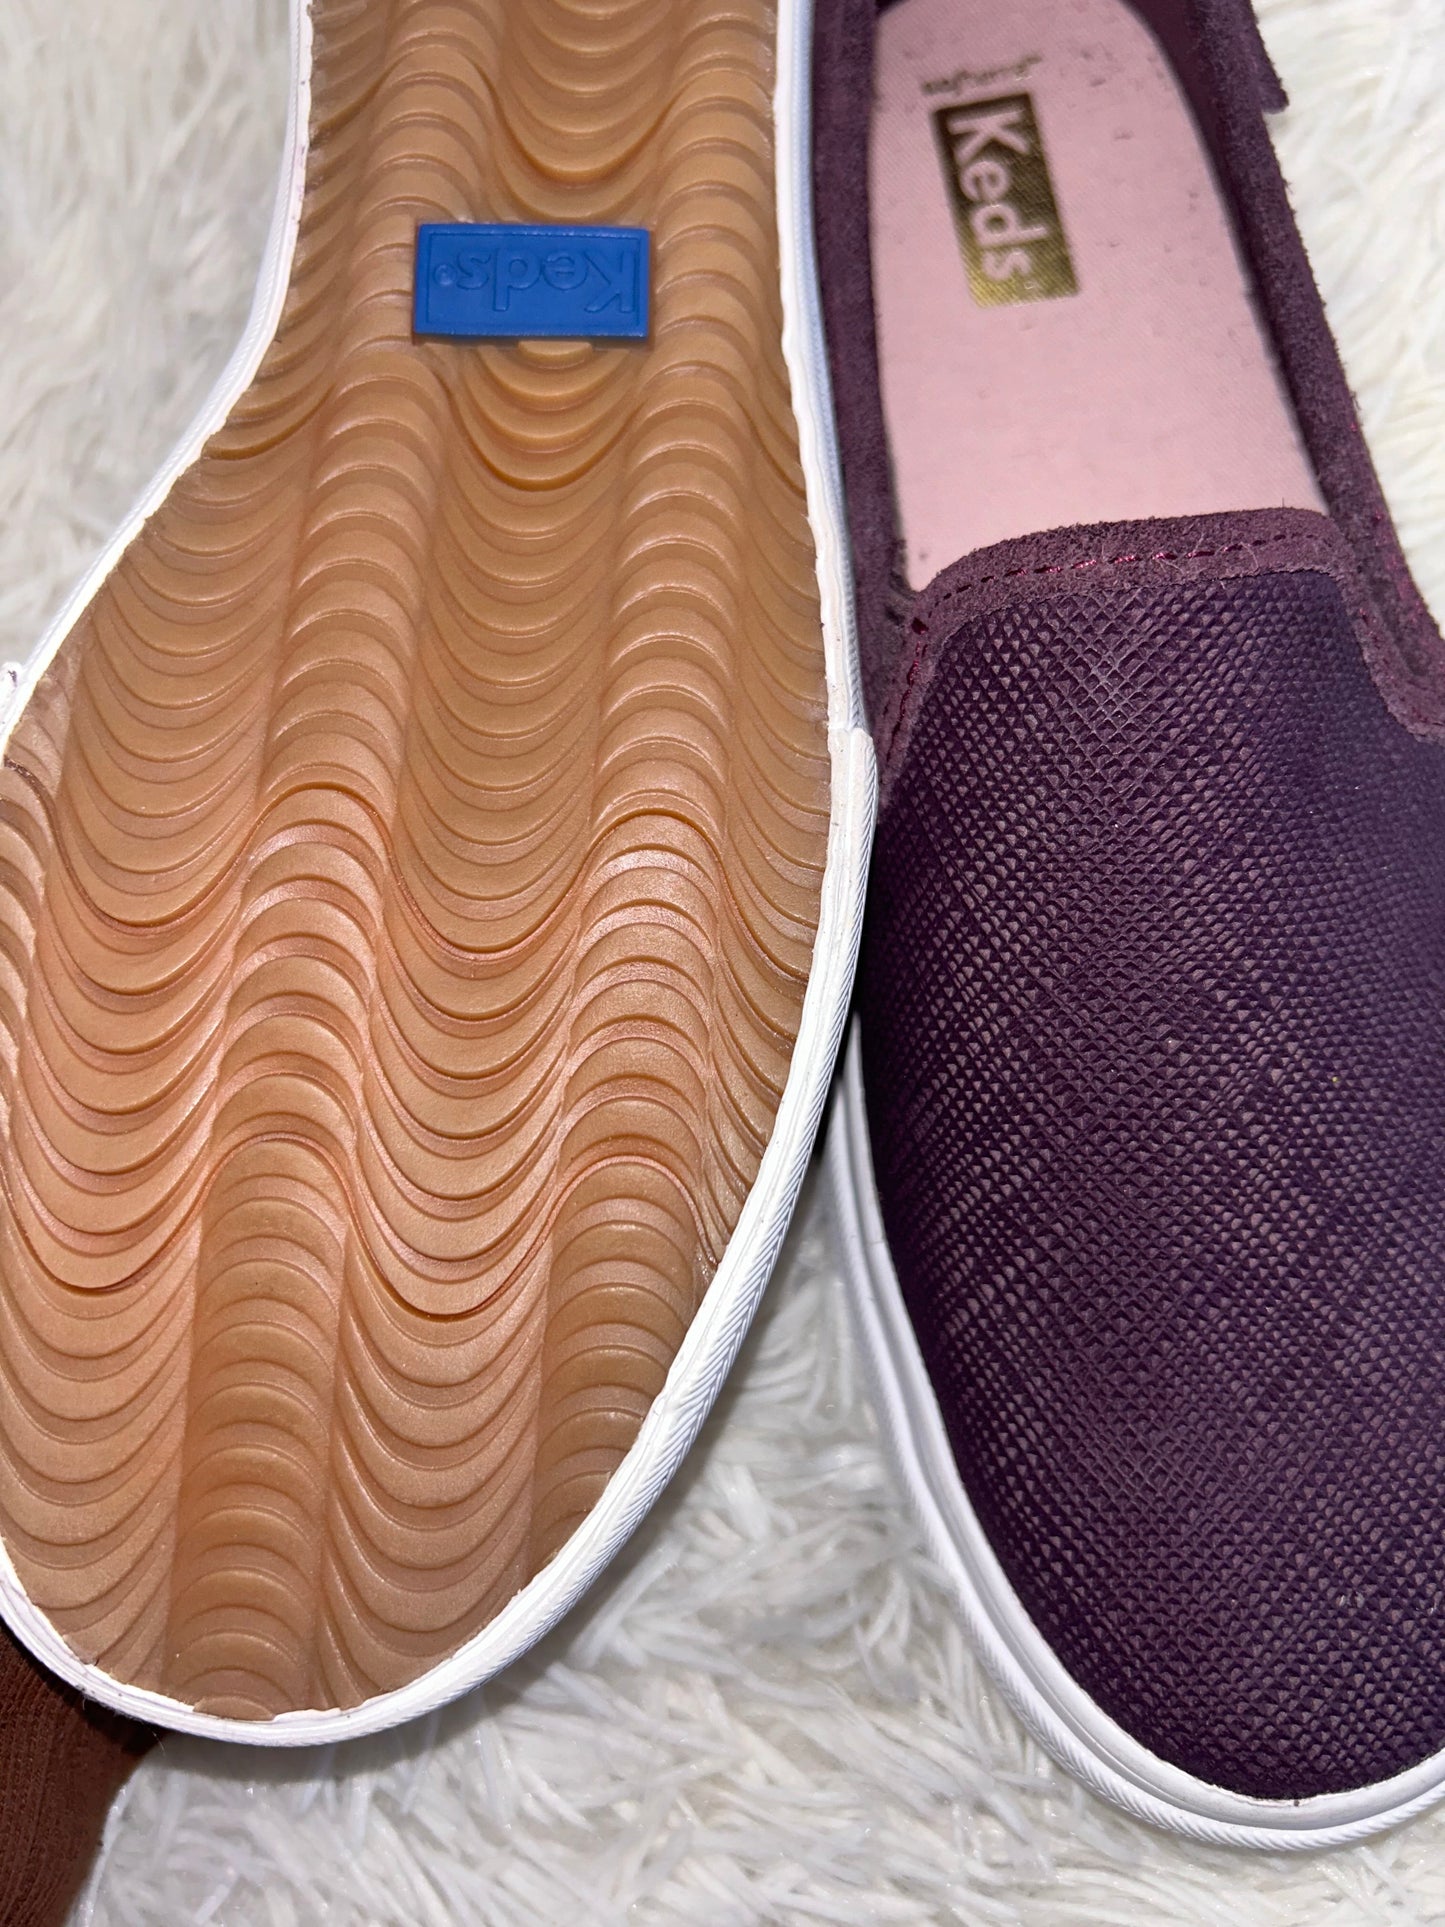 Shoes Flats Other By Keds  Size: 7.5